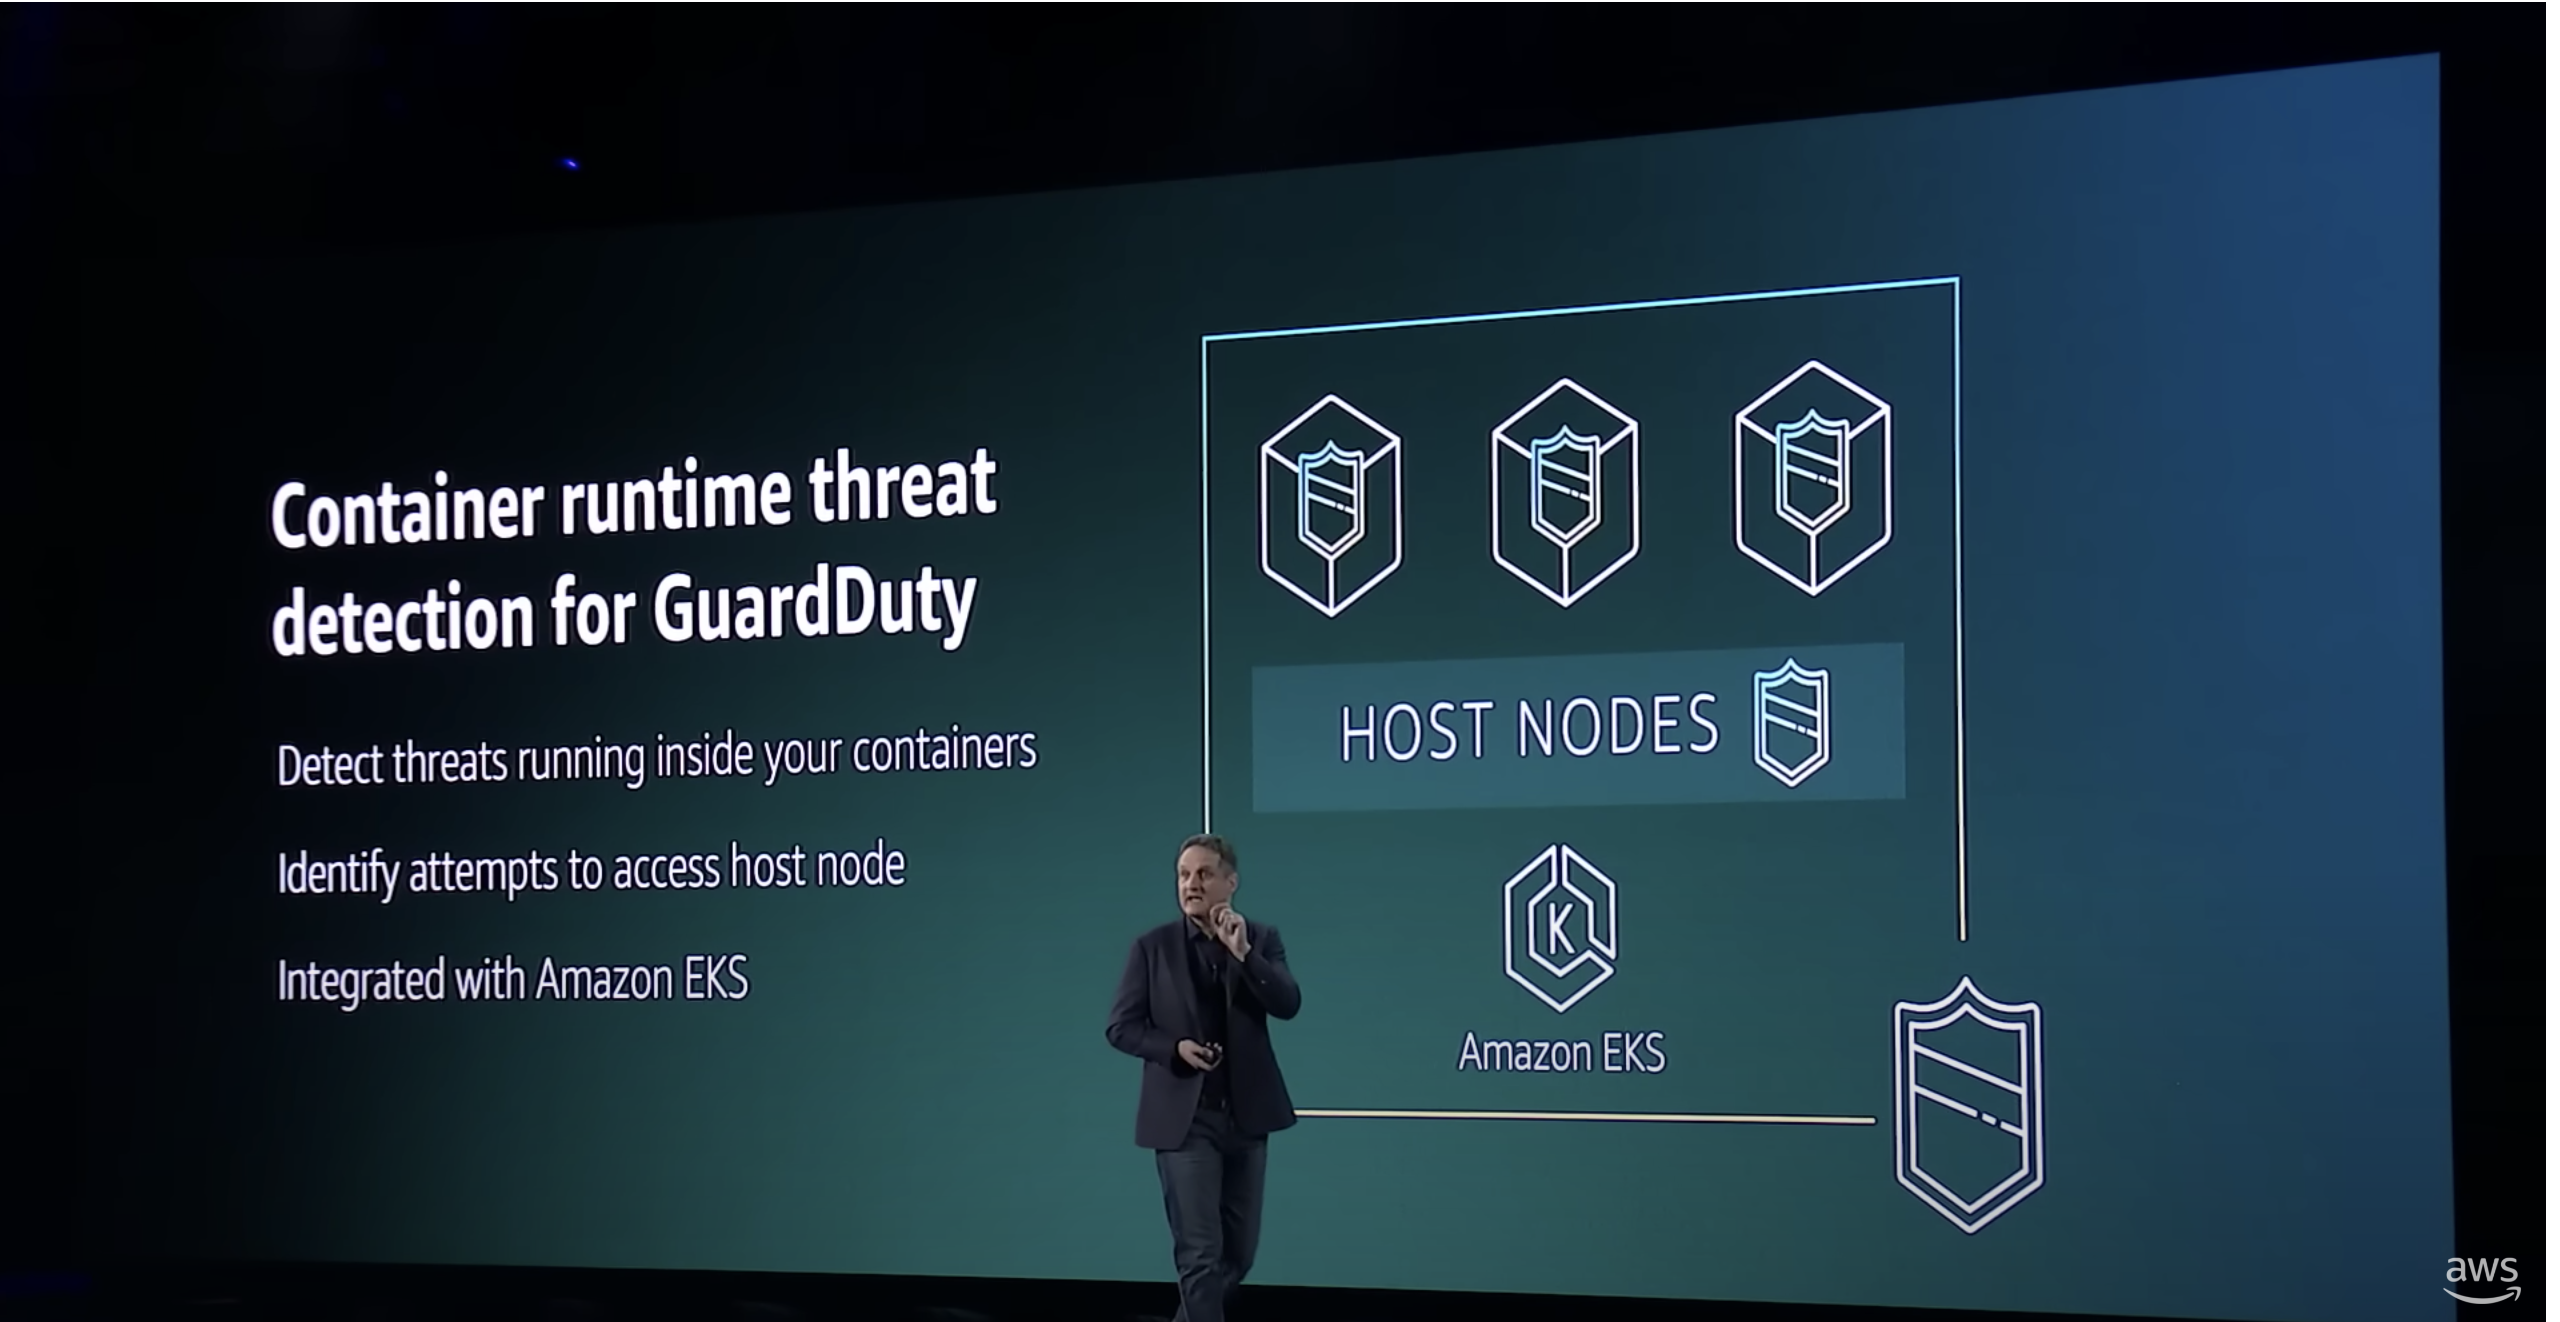 Container runtime threat detection for GuardDuty